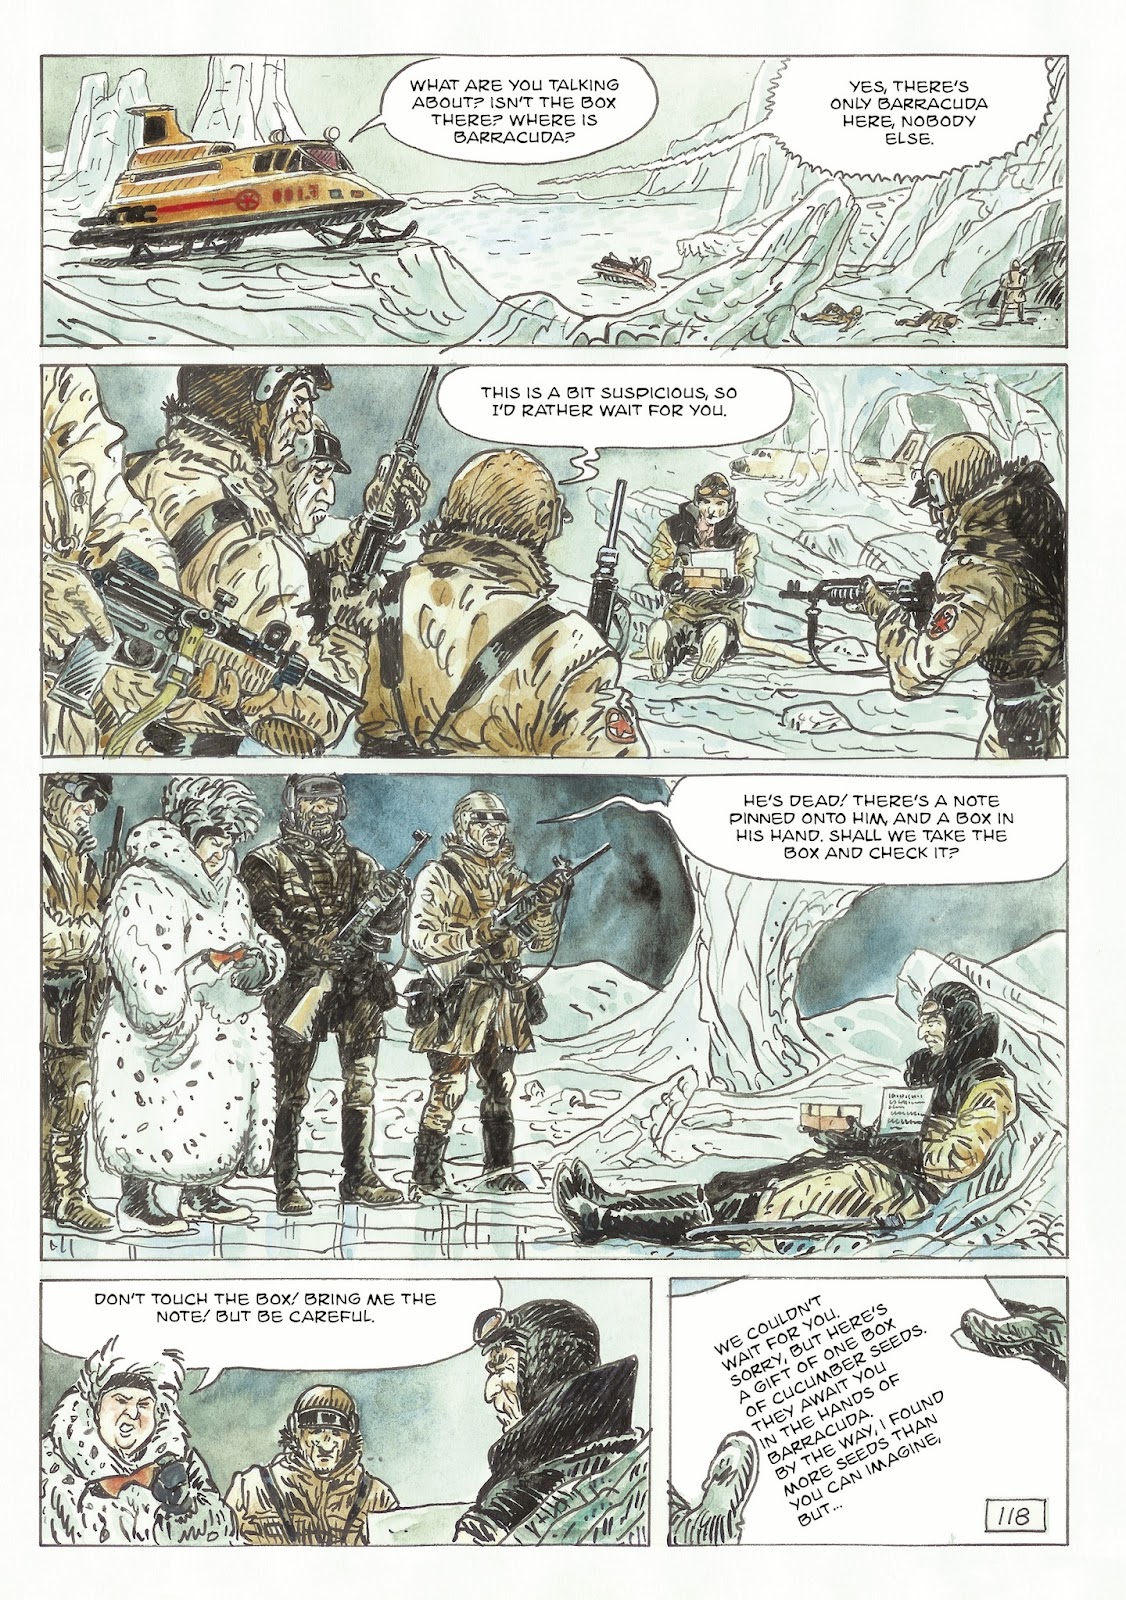 The Man With the Bear issue 2 - Page 64